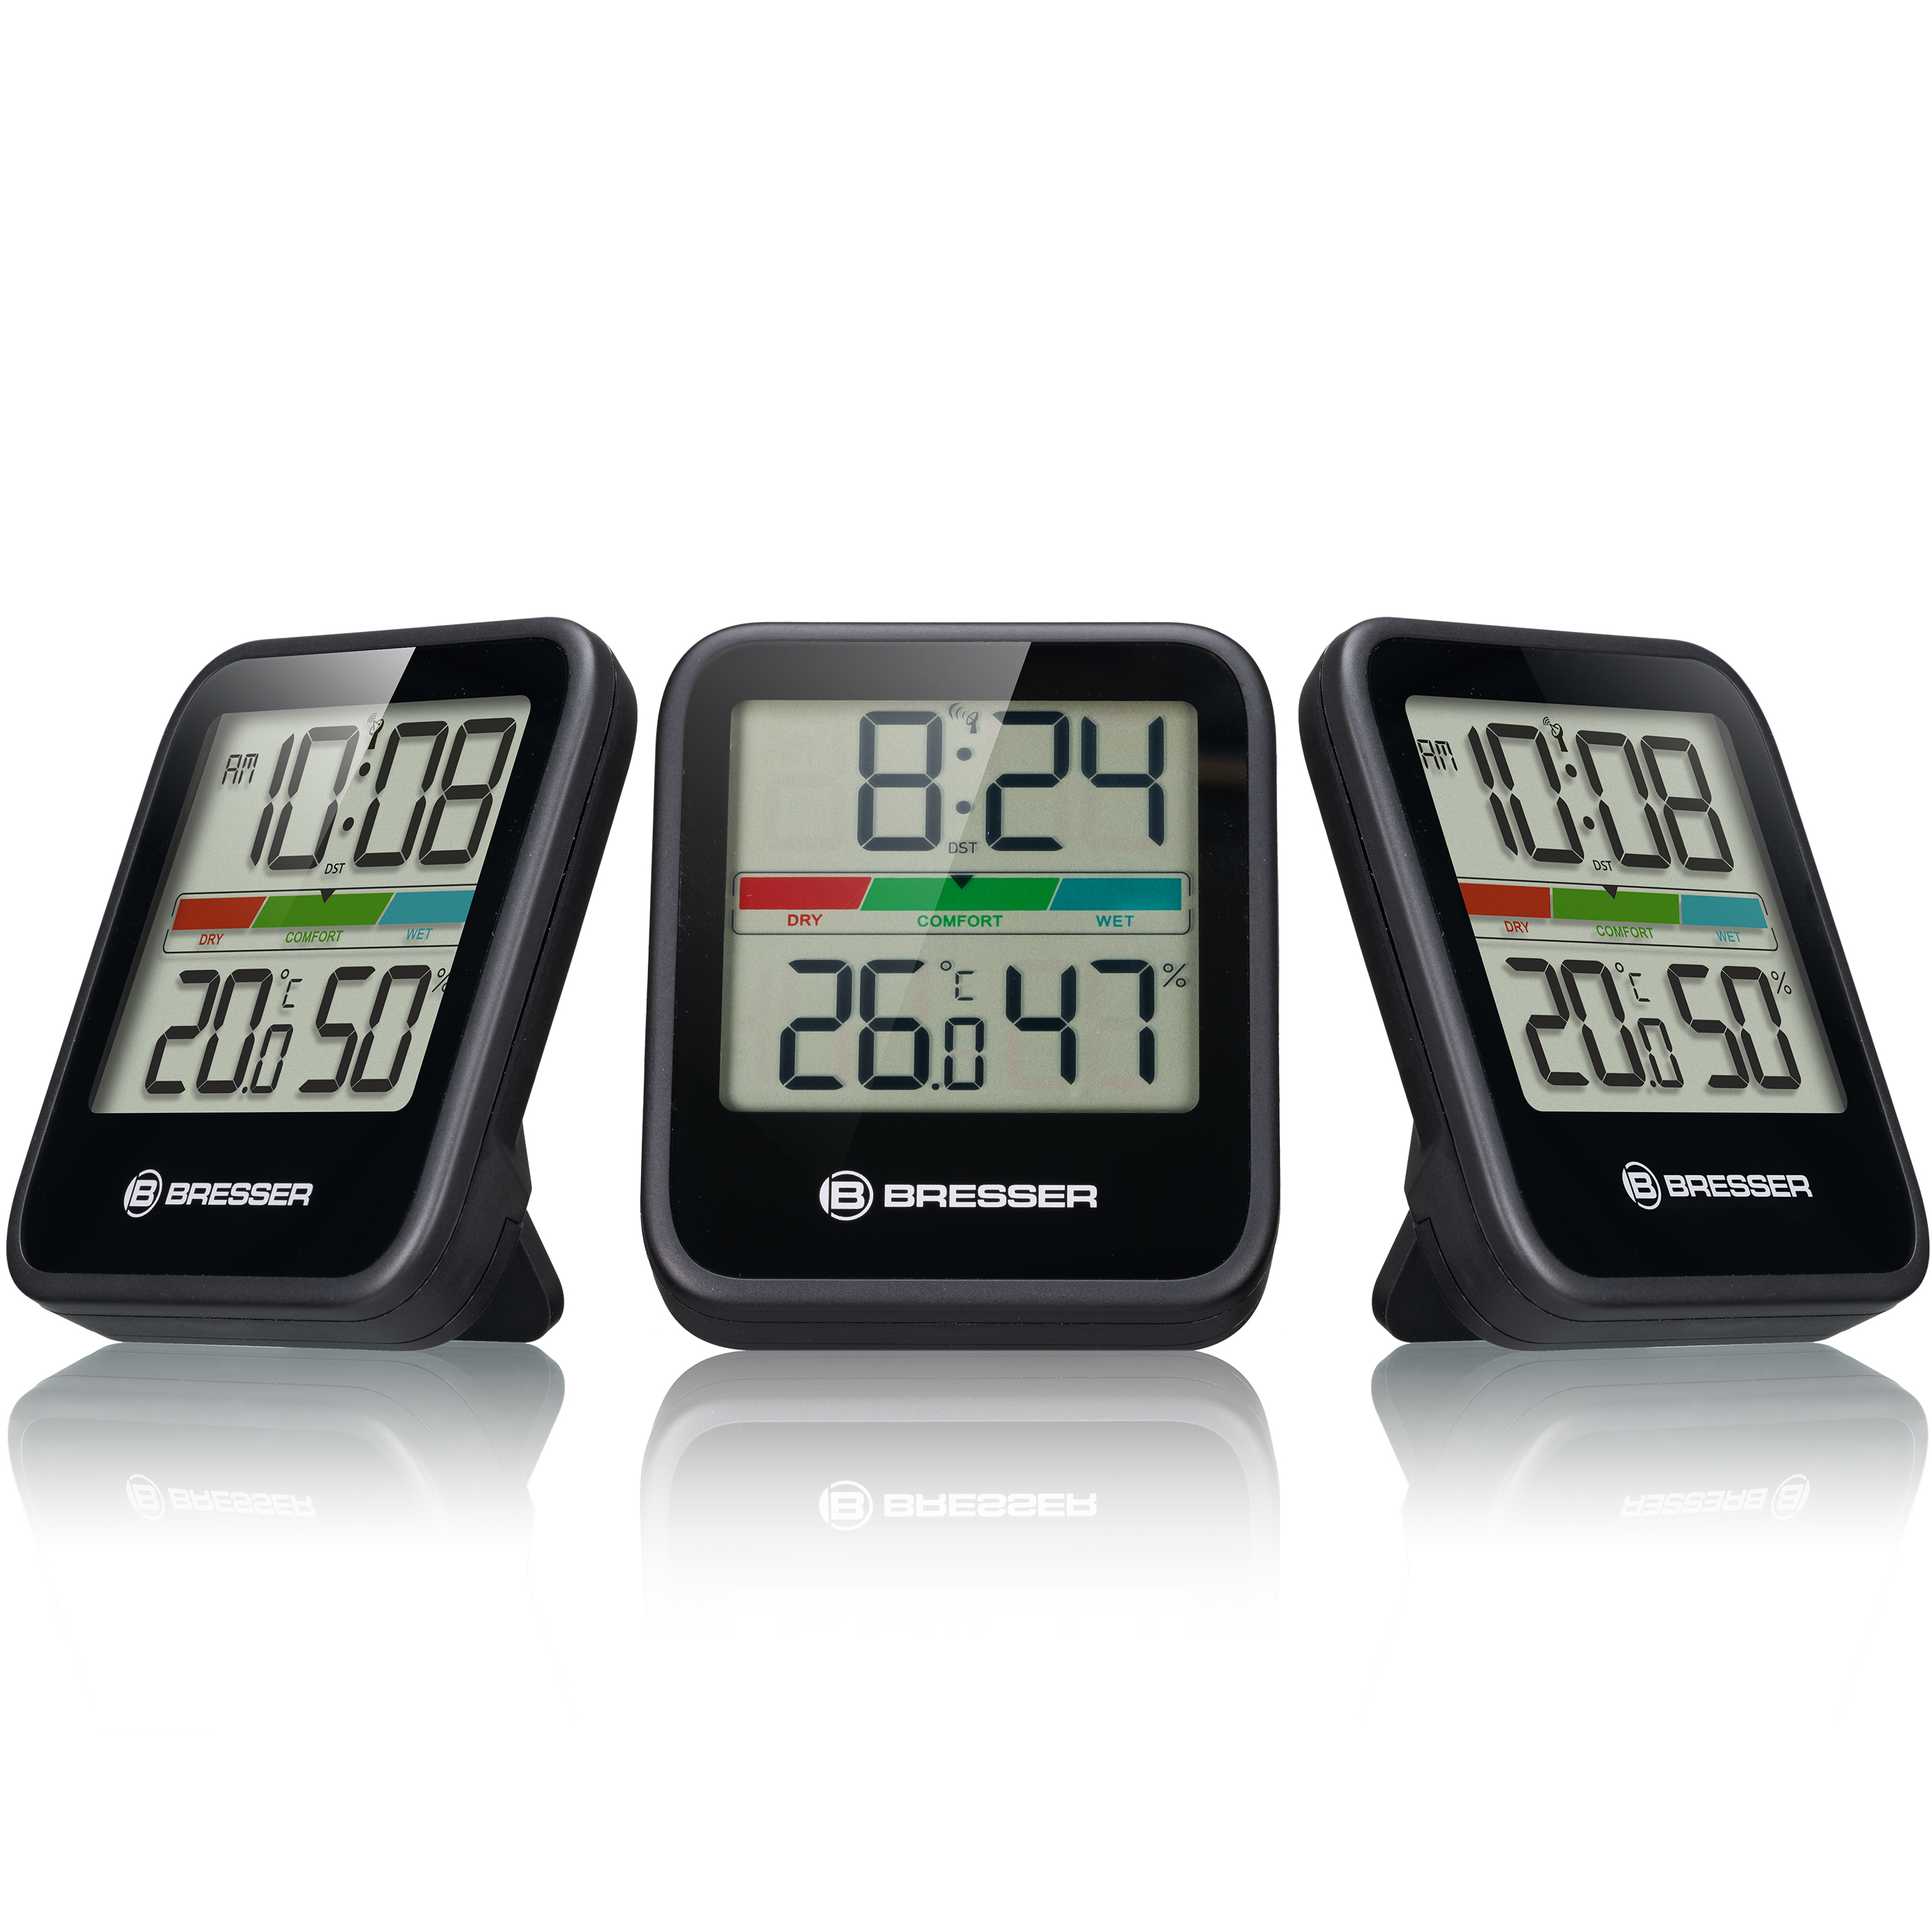 BRESSER Climate Monitor Thermometer/Hygrometer DCF Three-piece Set